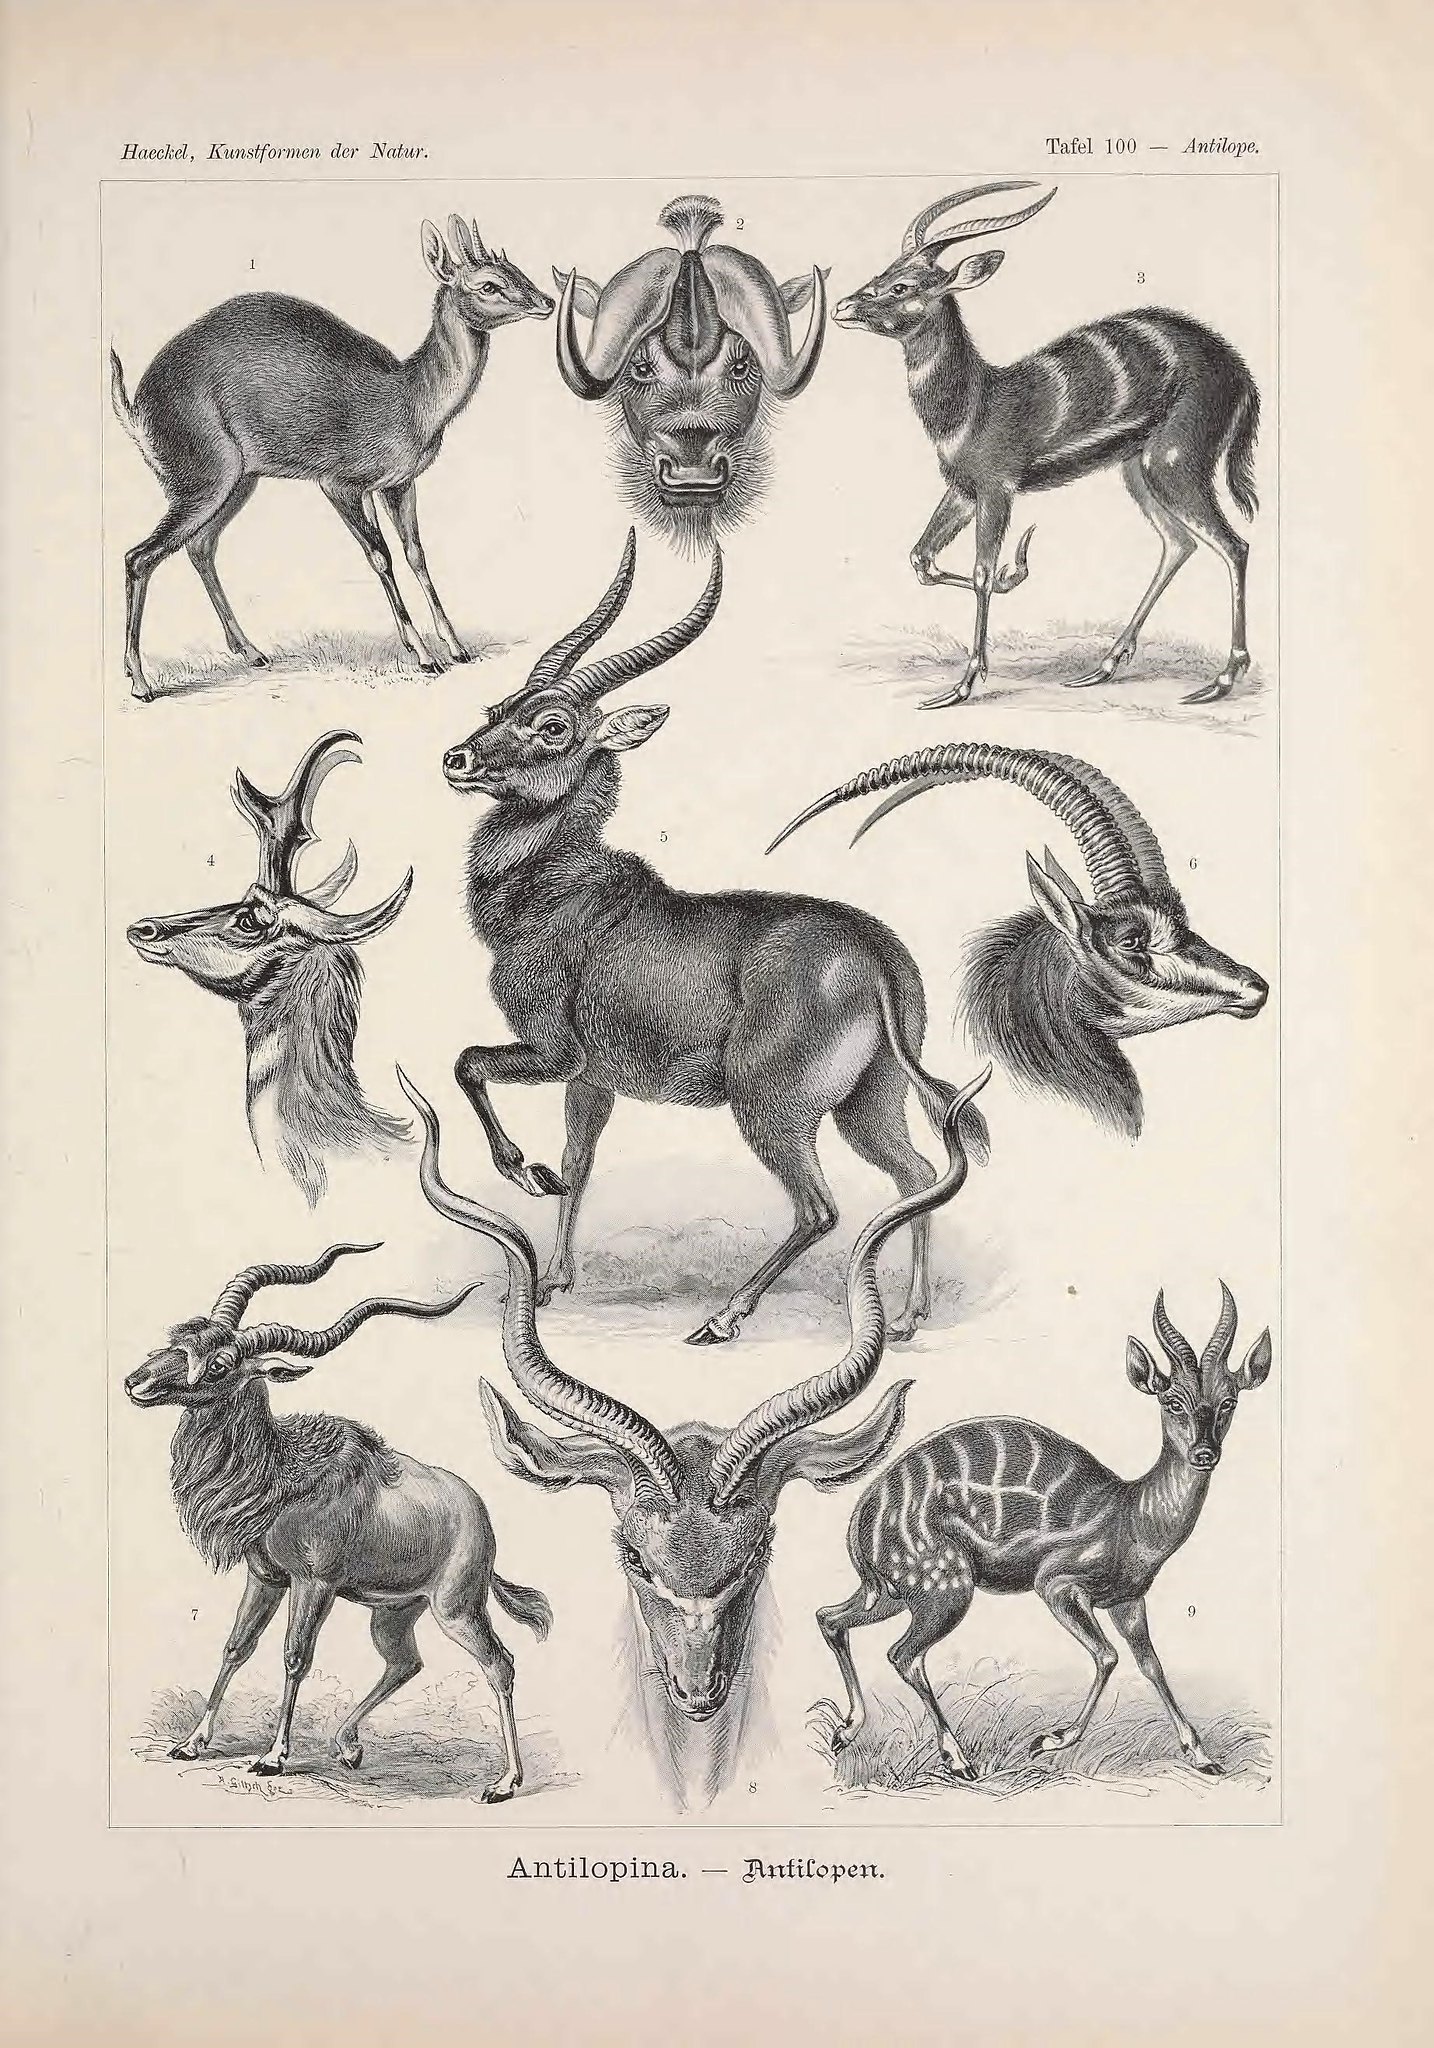 Collage of various black and white drawings of antelopes, some full body, others head only.